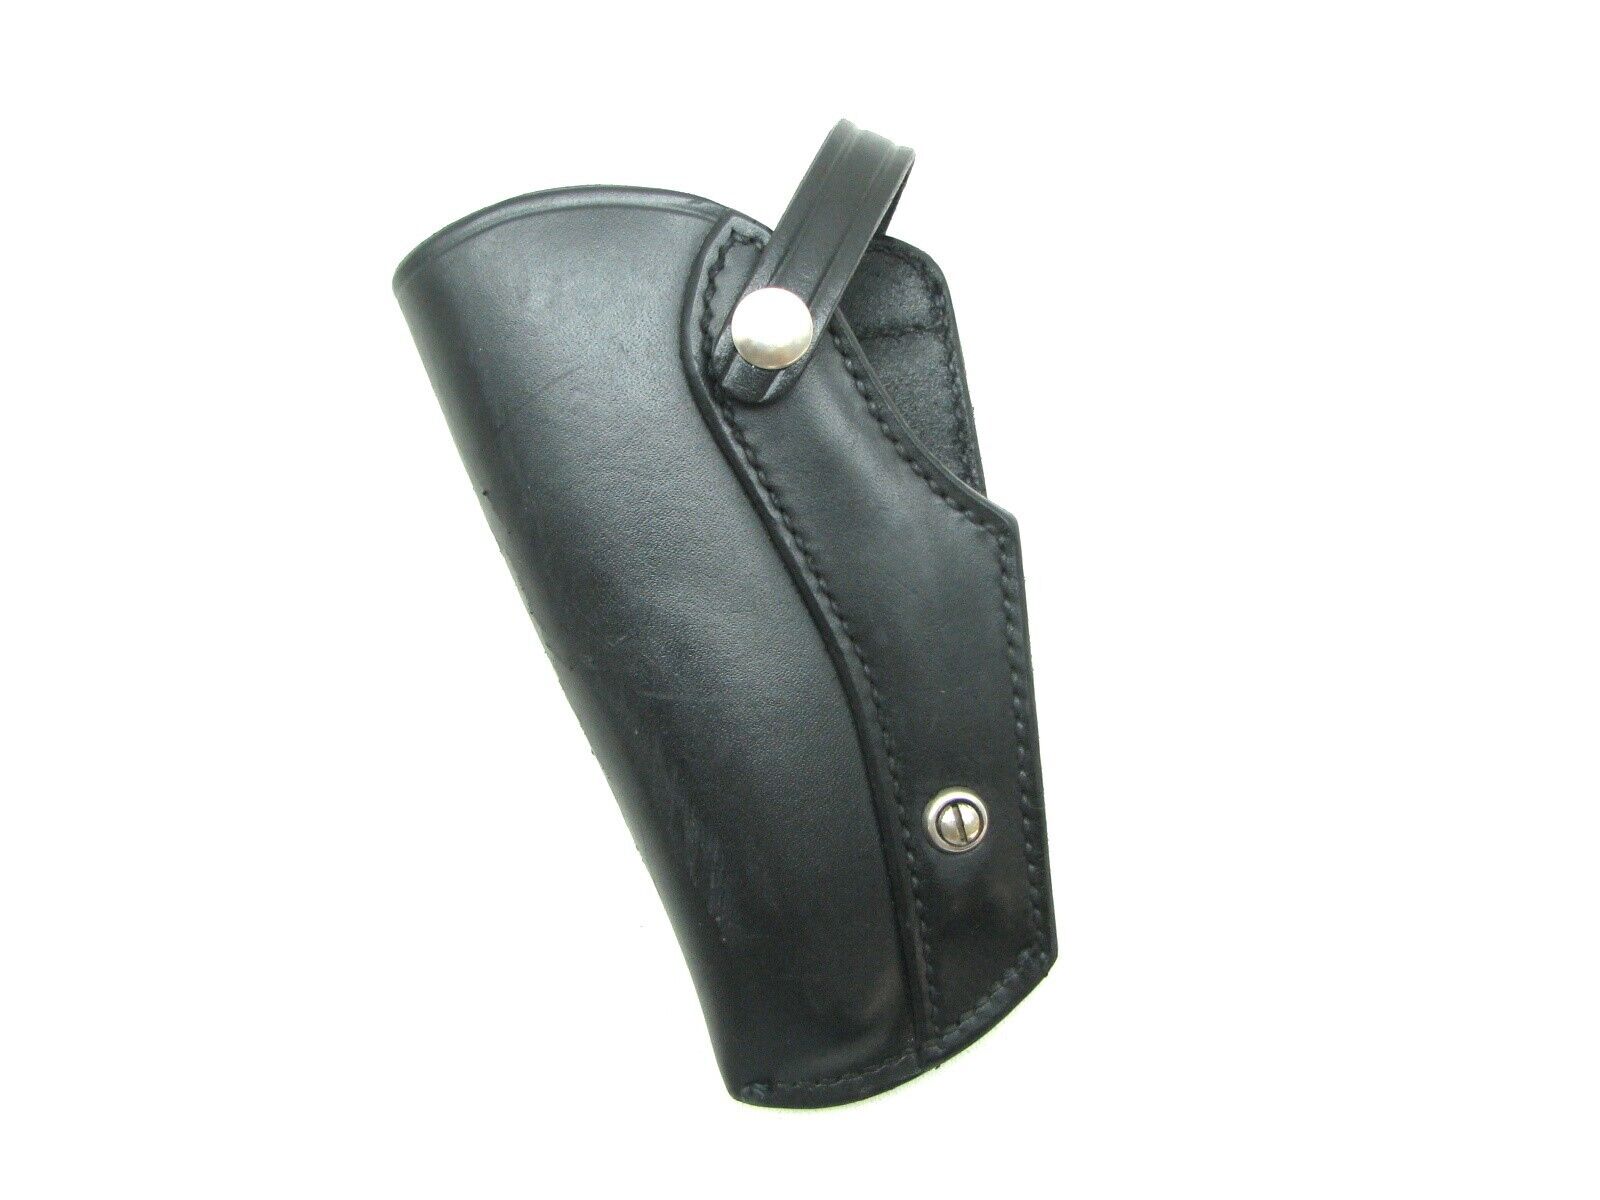 Holster fits 4-inch Revolvers including Smith & Wesson, Ruger, Colt